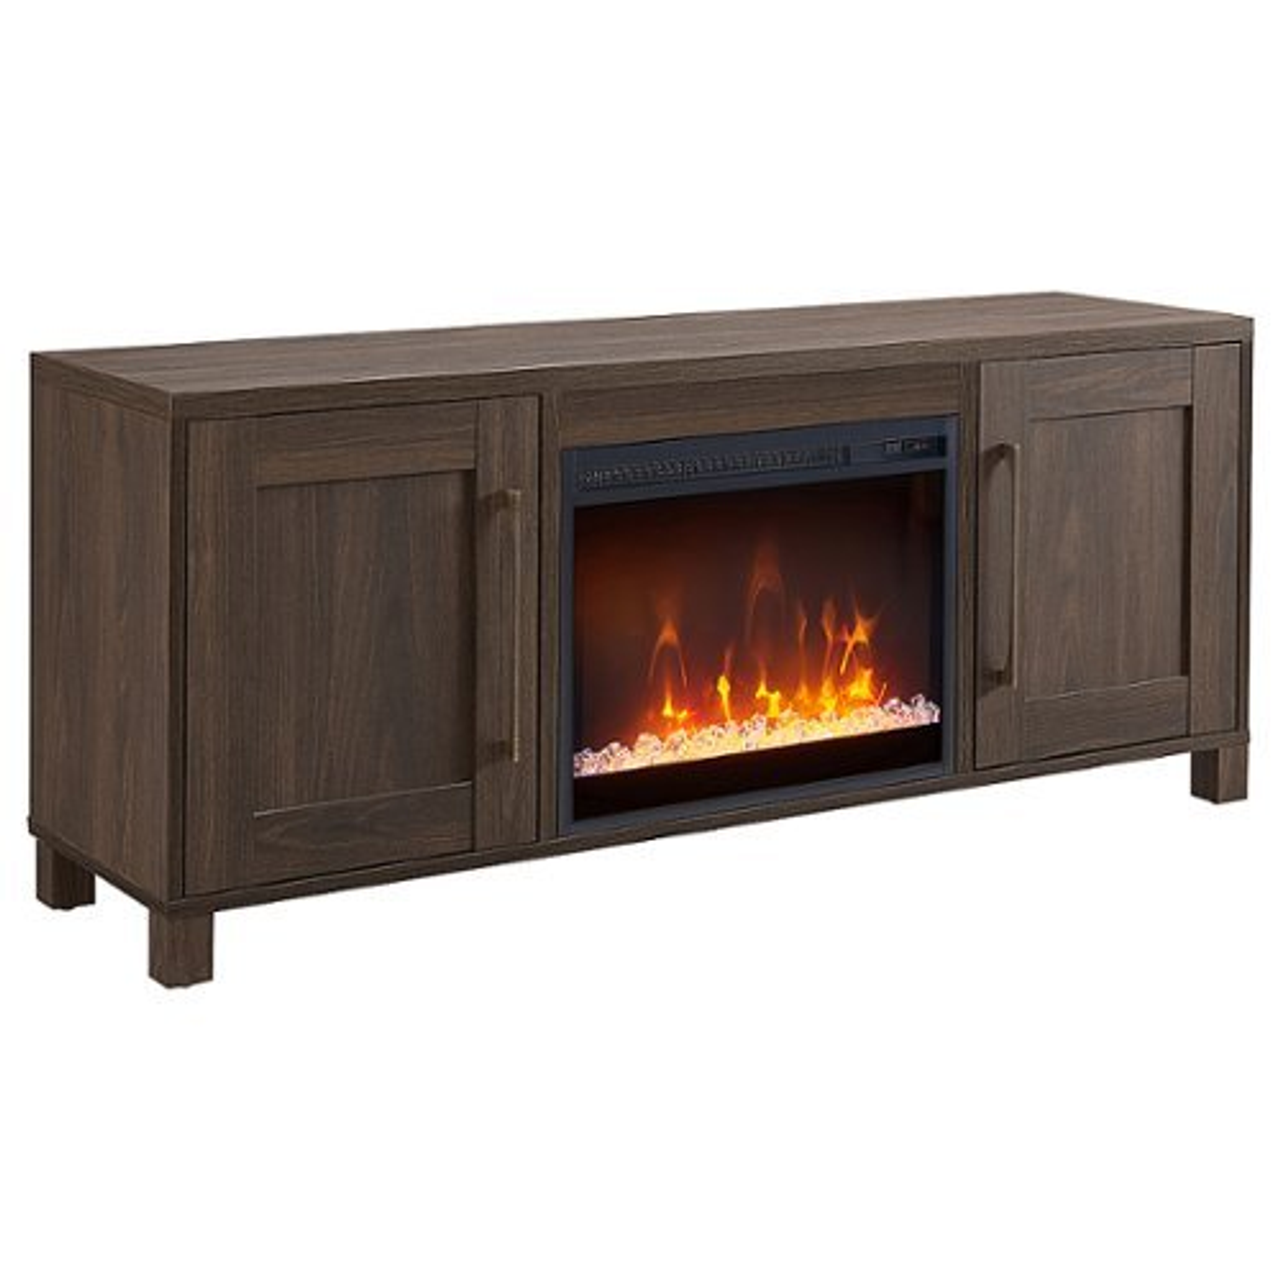 Camden&Wells - Chabot Crystal Fireplace TV Stand for TVs up to 65" - Alder Brown